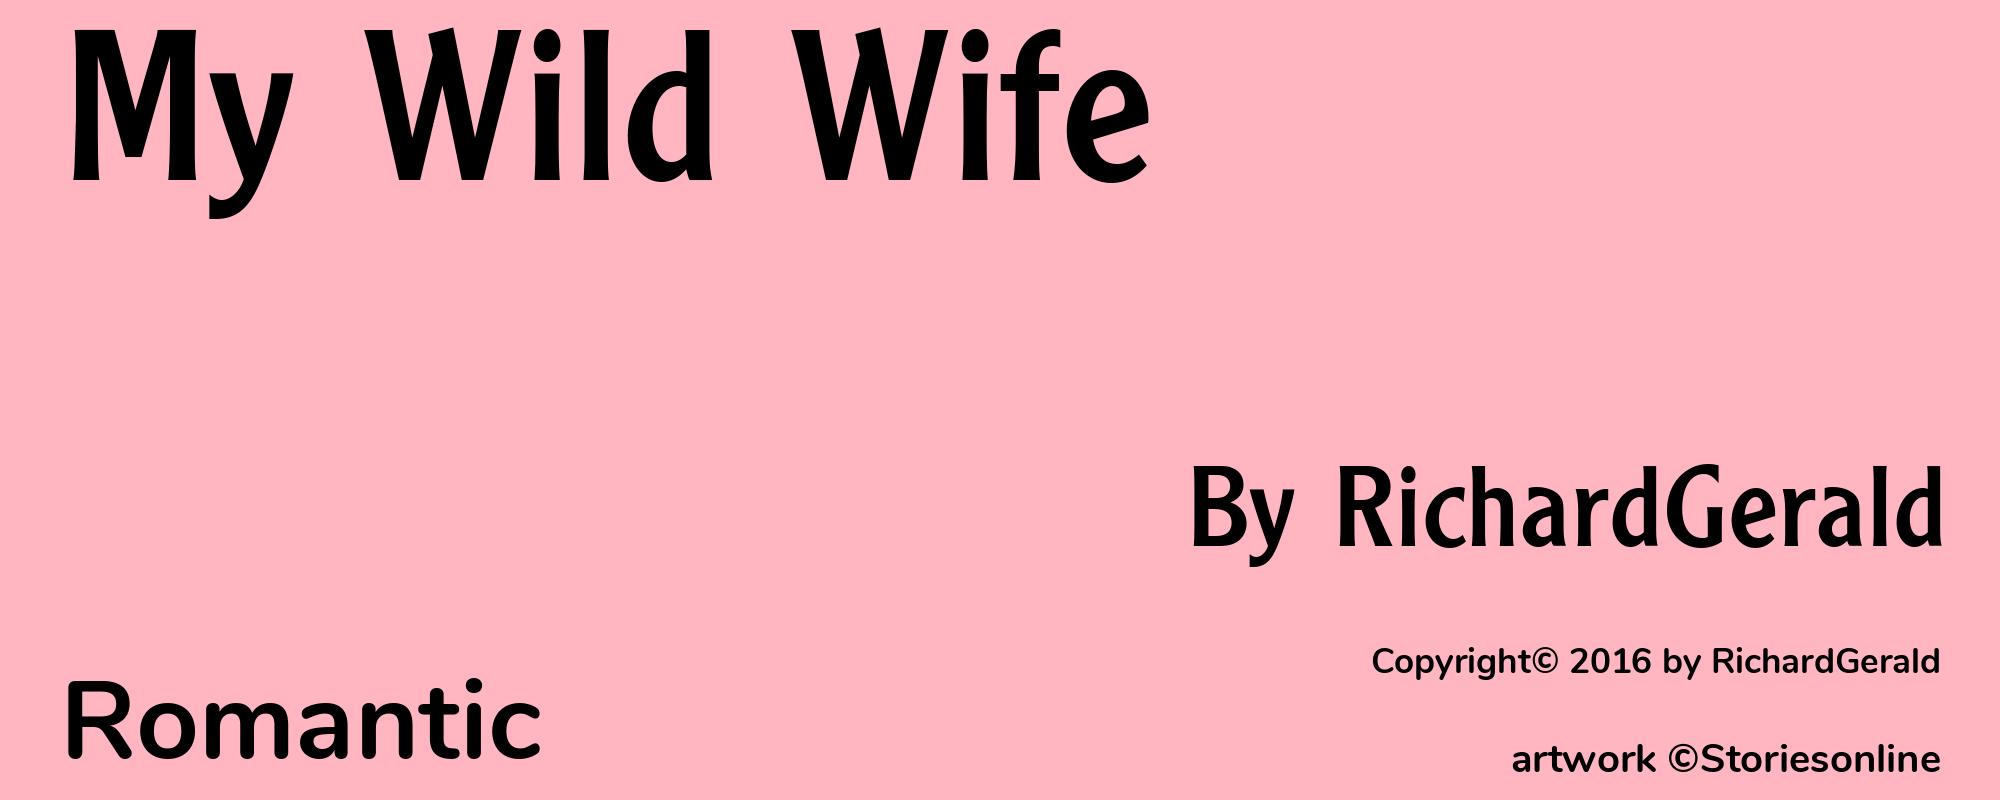 My Wild Wife - Cover